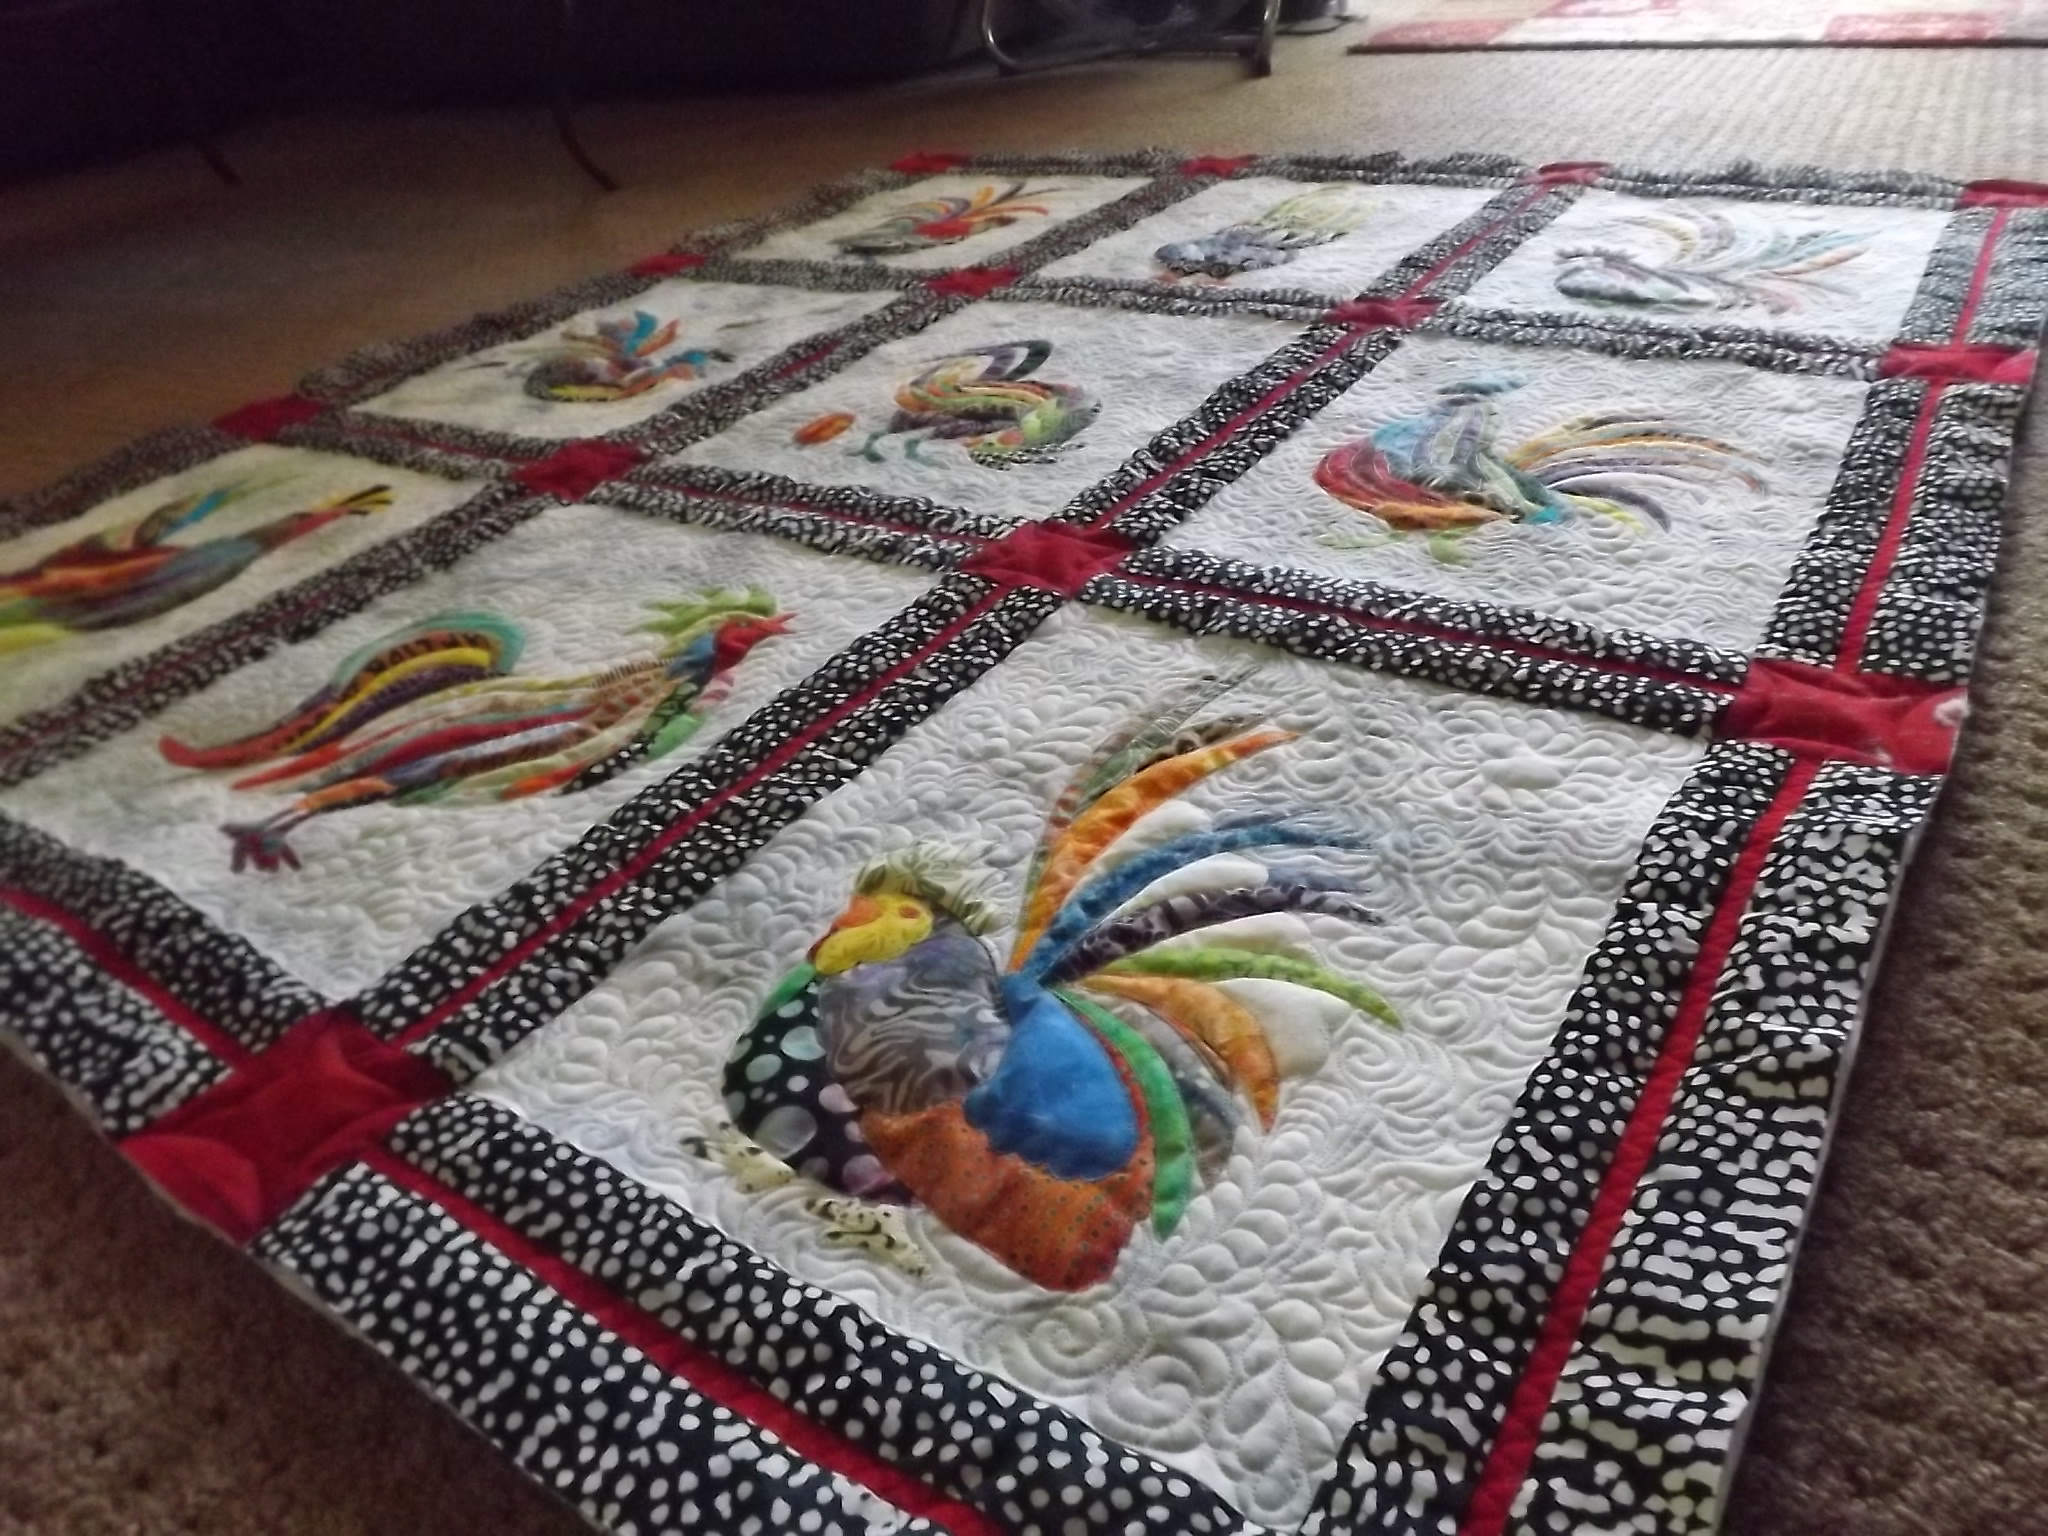 Radical Roosters quilt, now quilted.